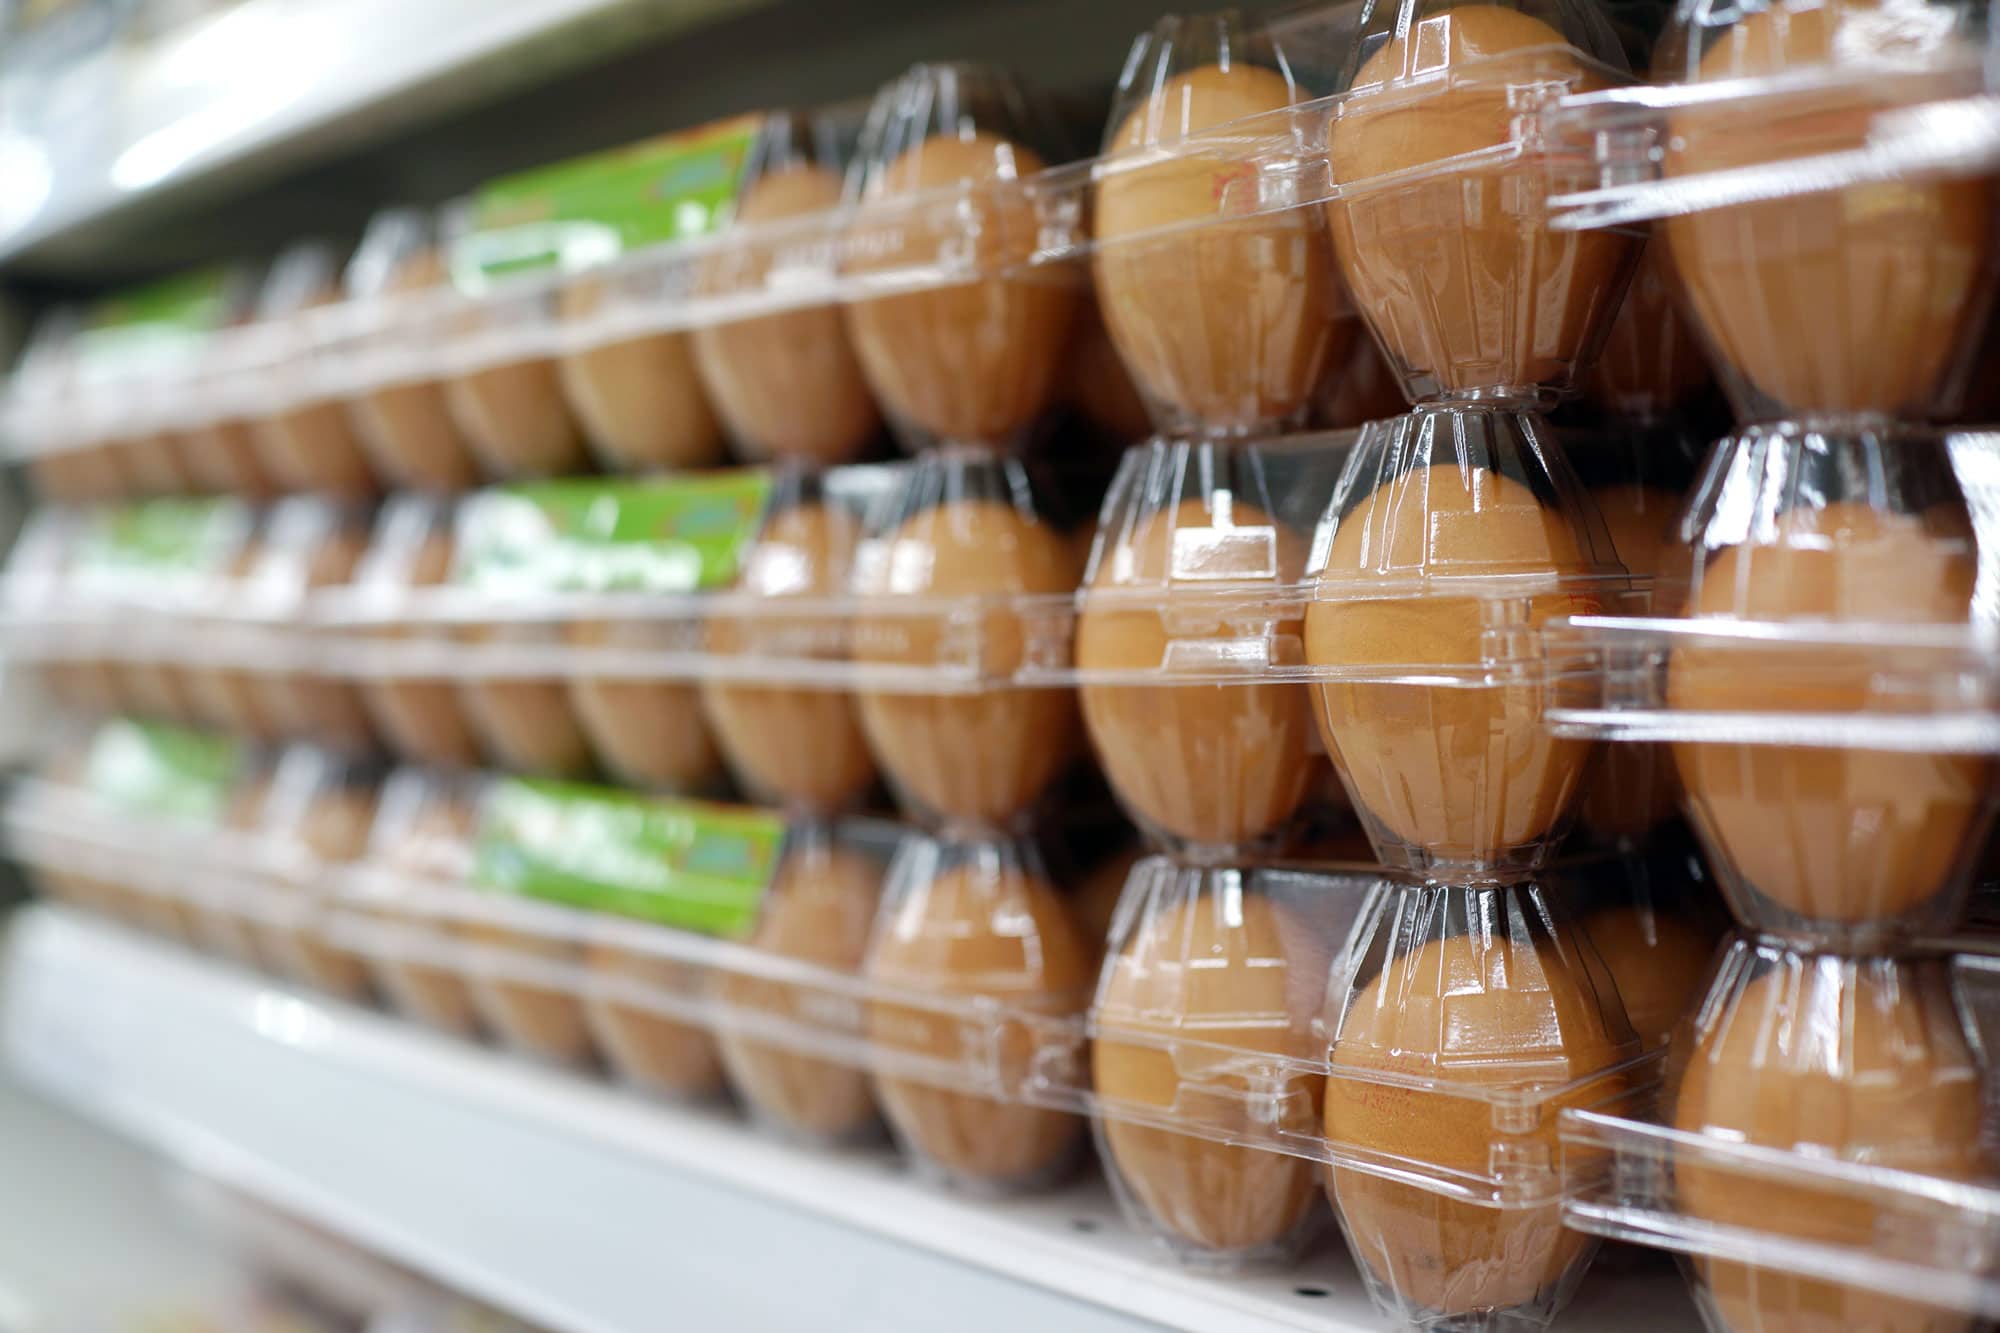 Brown eggs in plastic containers on grocery shelf